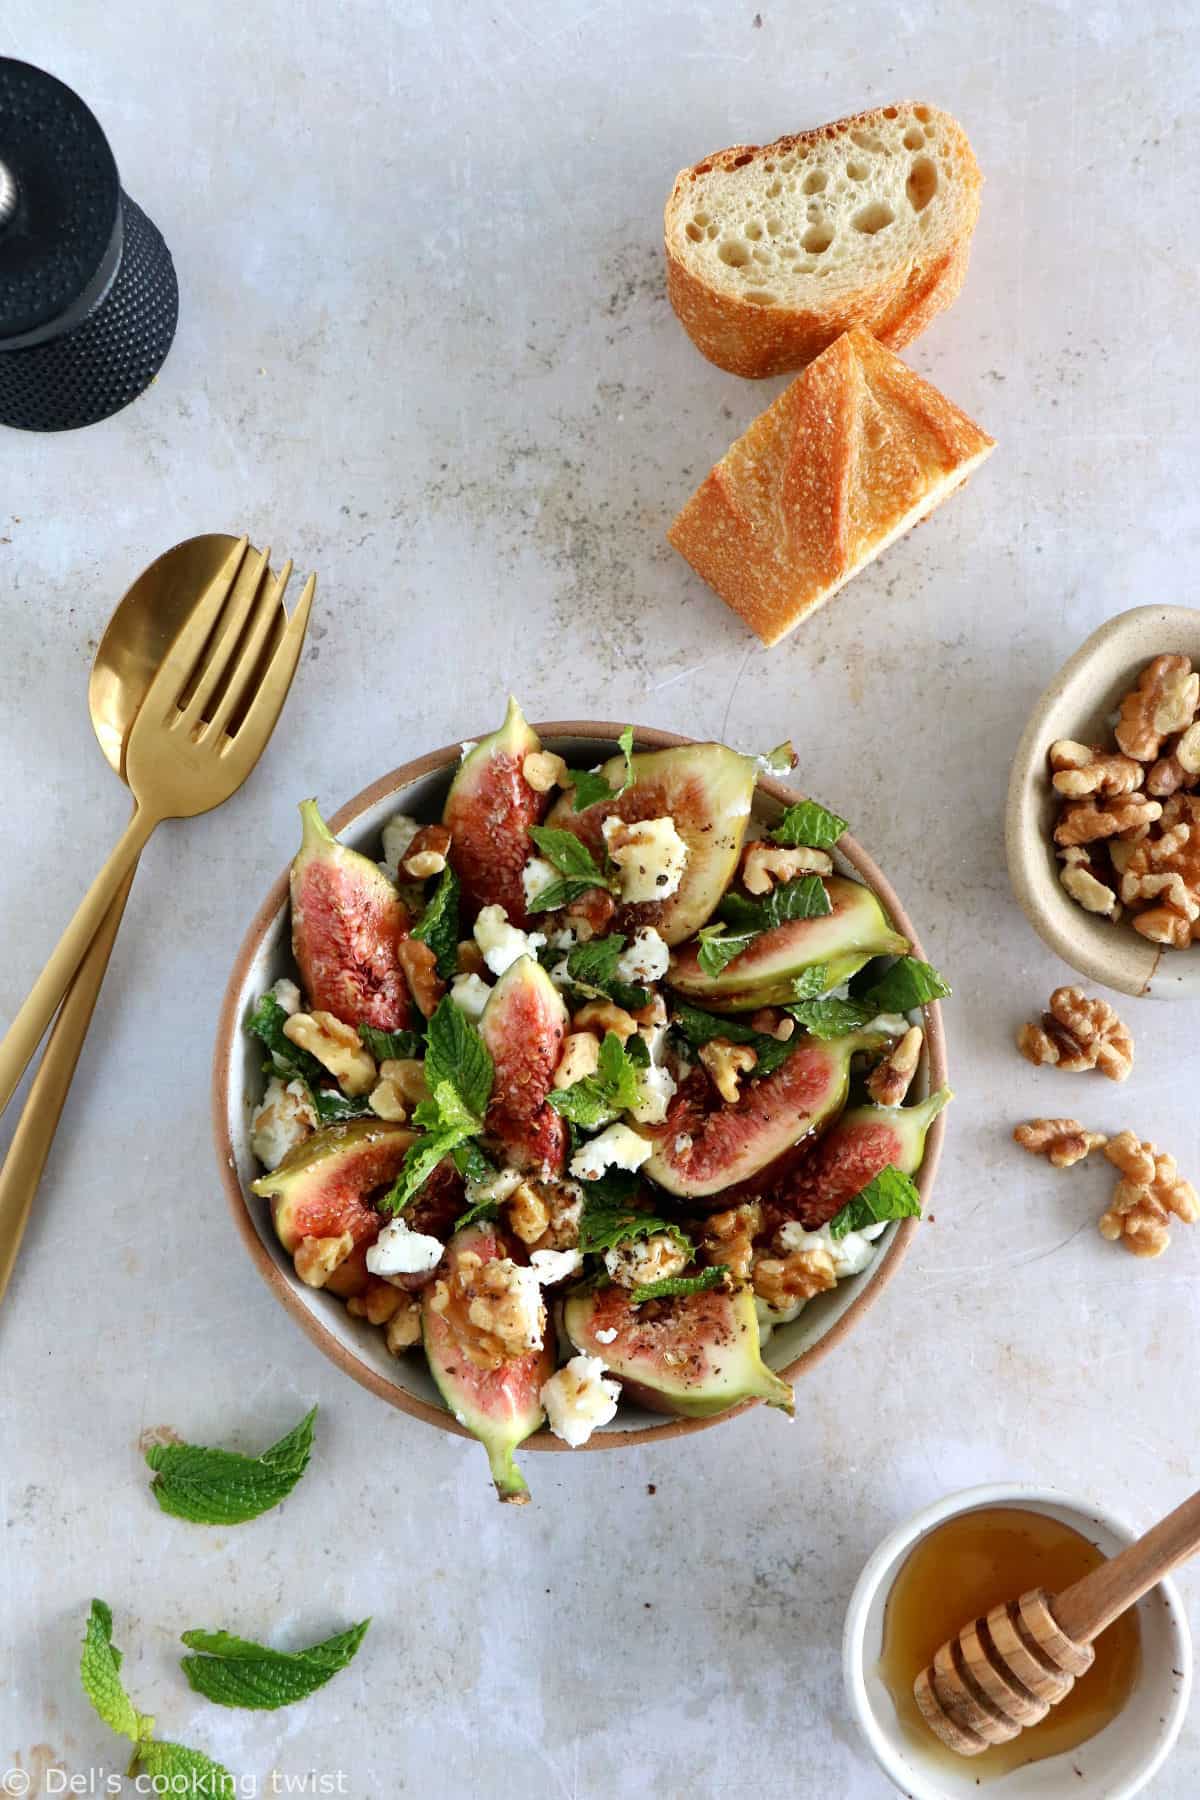 This simple fig and goat cheese salad with honey is bursting with refreshing flavors. A quick 5-minute recipe that is both vegetarian and gluten-free.